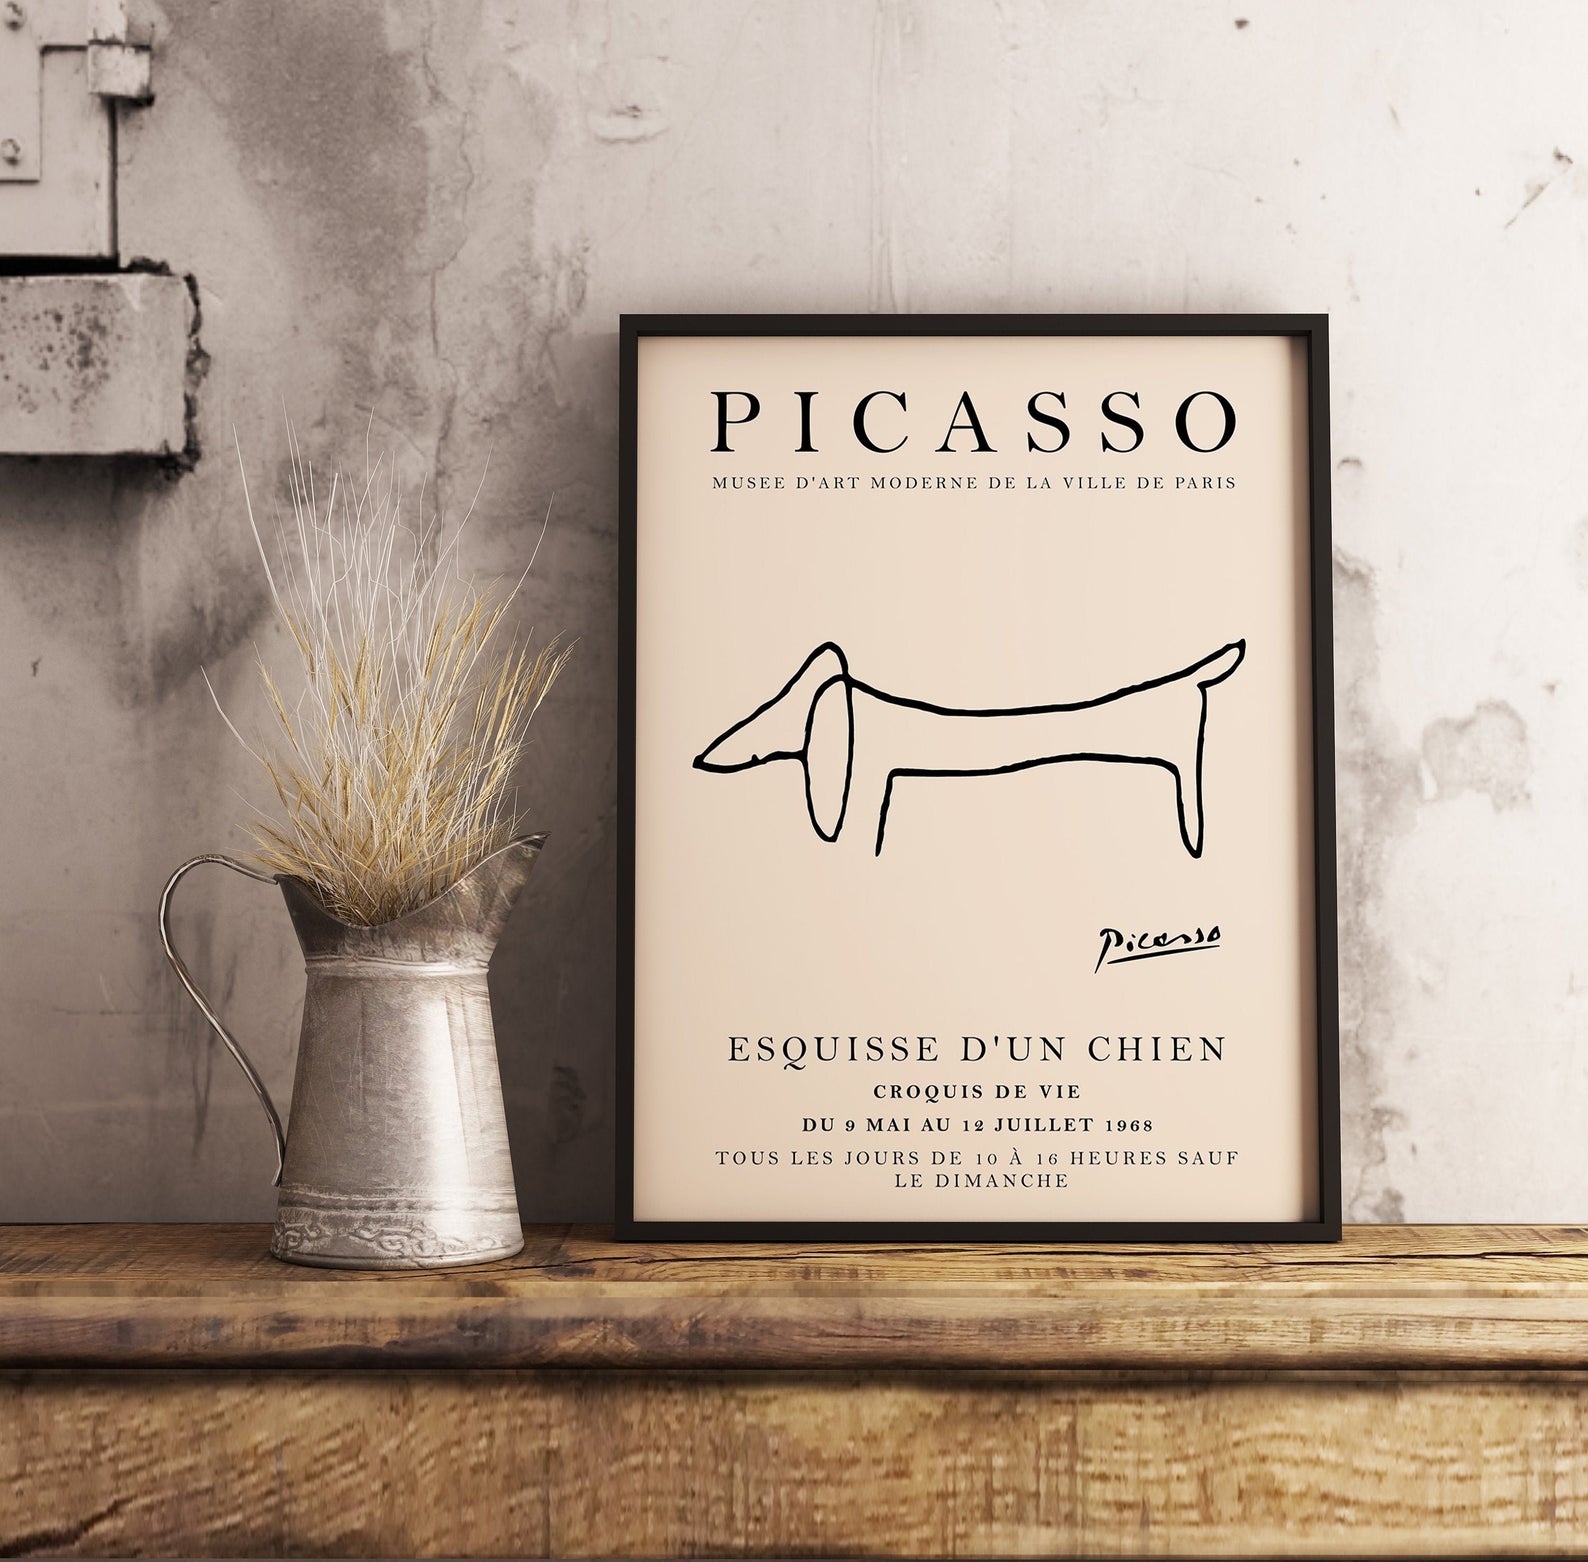 Picasso Dachshund Print | 50 Home Decor Finds